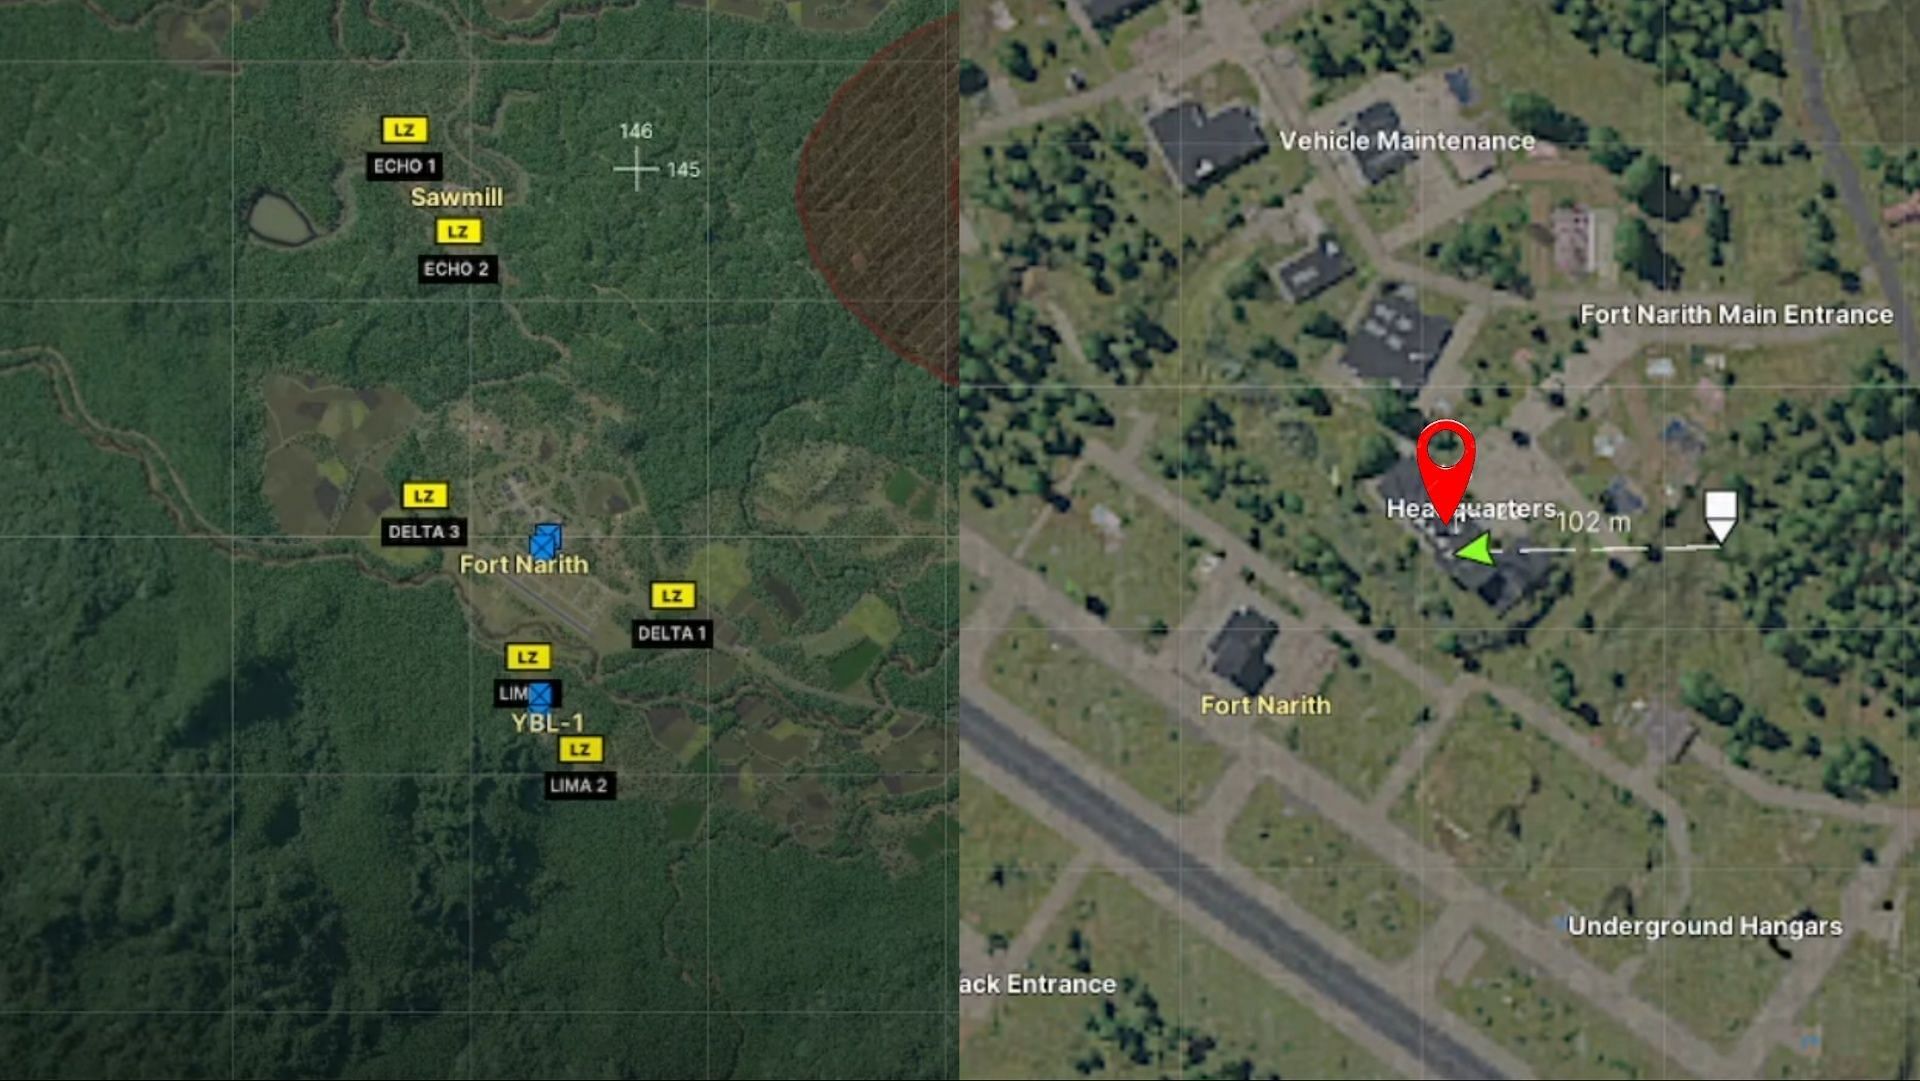 Location of the Fort Narith Headquarters (Image via MADFINGER Gamer|| YouTube/13lacklight)